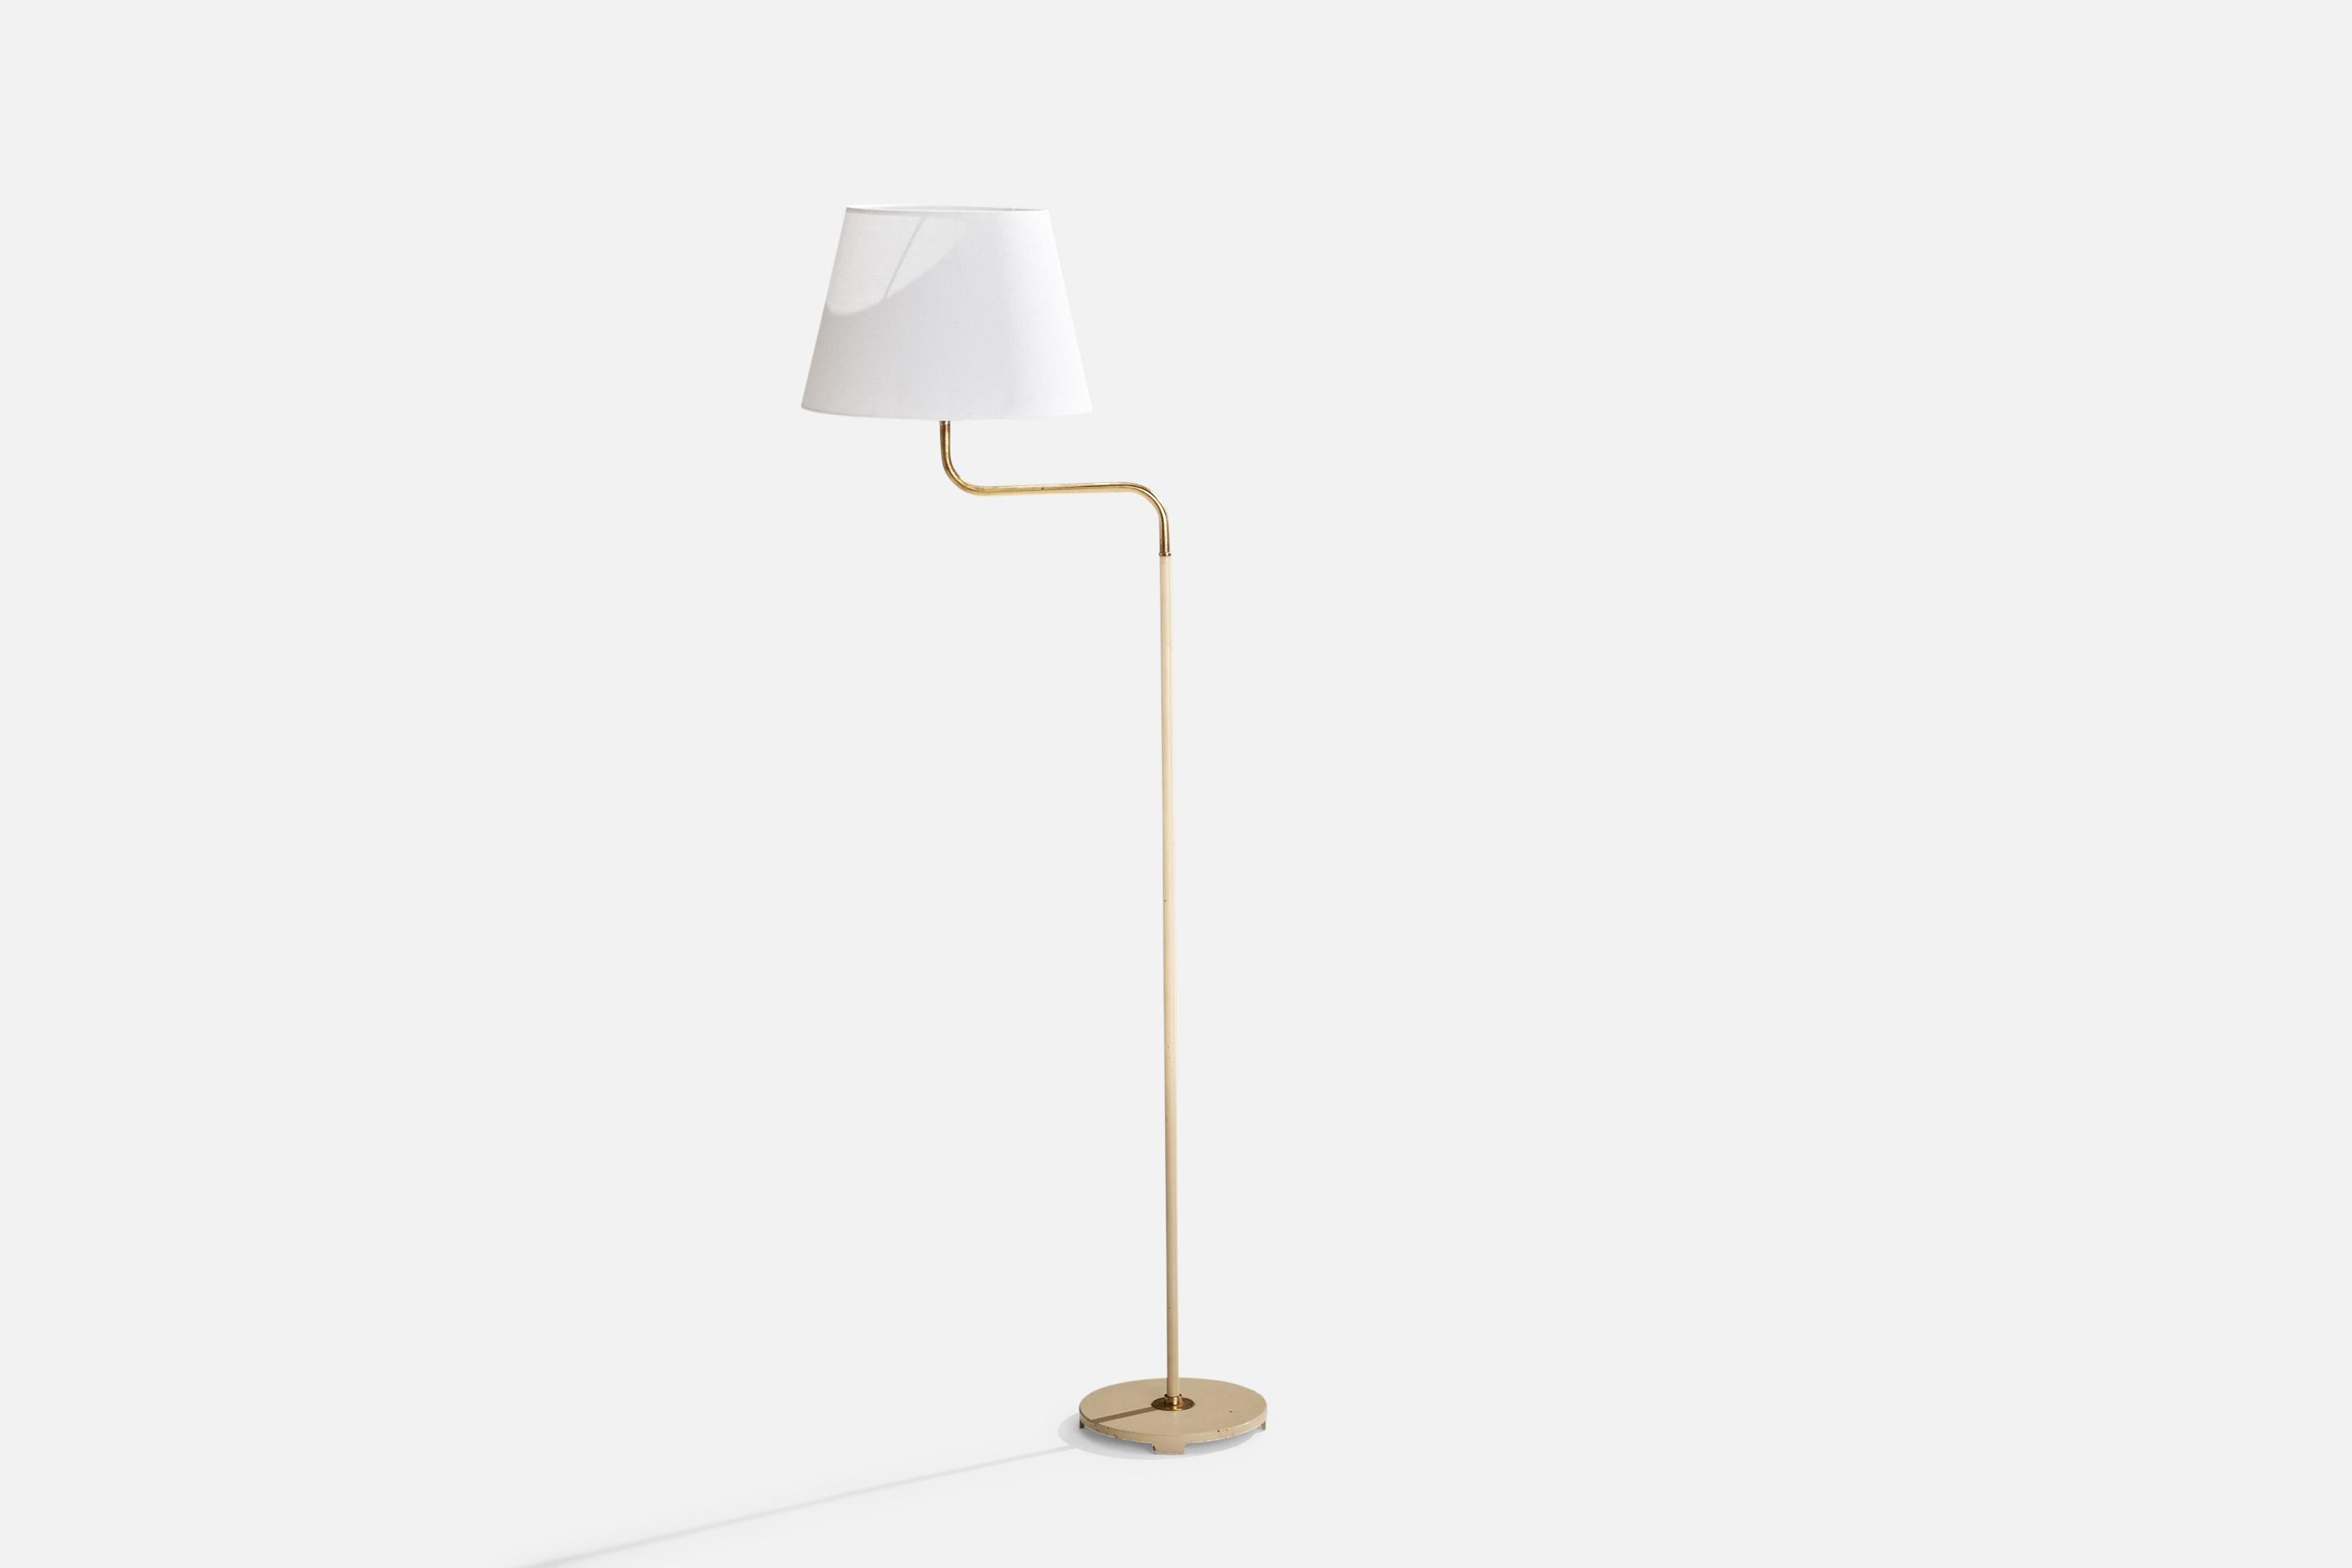 An adjustable brass and grey beige-lacquered metal floor lamp designed and produced by ASEA, Sweden, c. 1940s.

Overall Dimensions (inches): 60” H x13.5” W x 23.75” D
Stated dimensions include shade.
Bulb Specifications: E-26 Bulb
Number of Sockets: